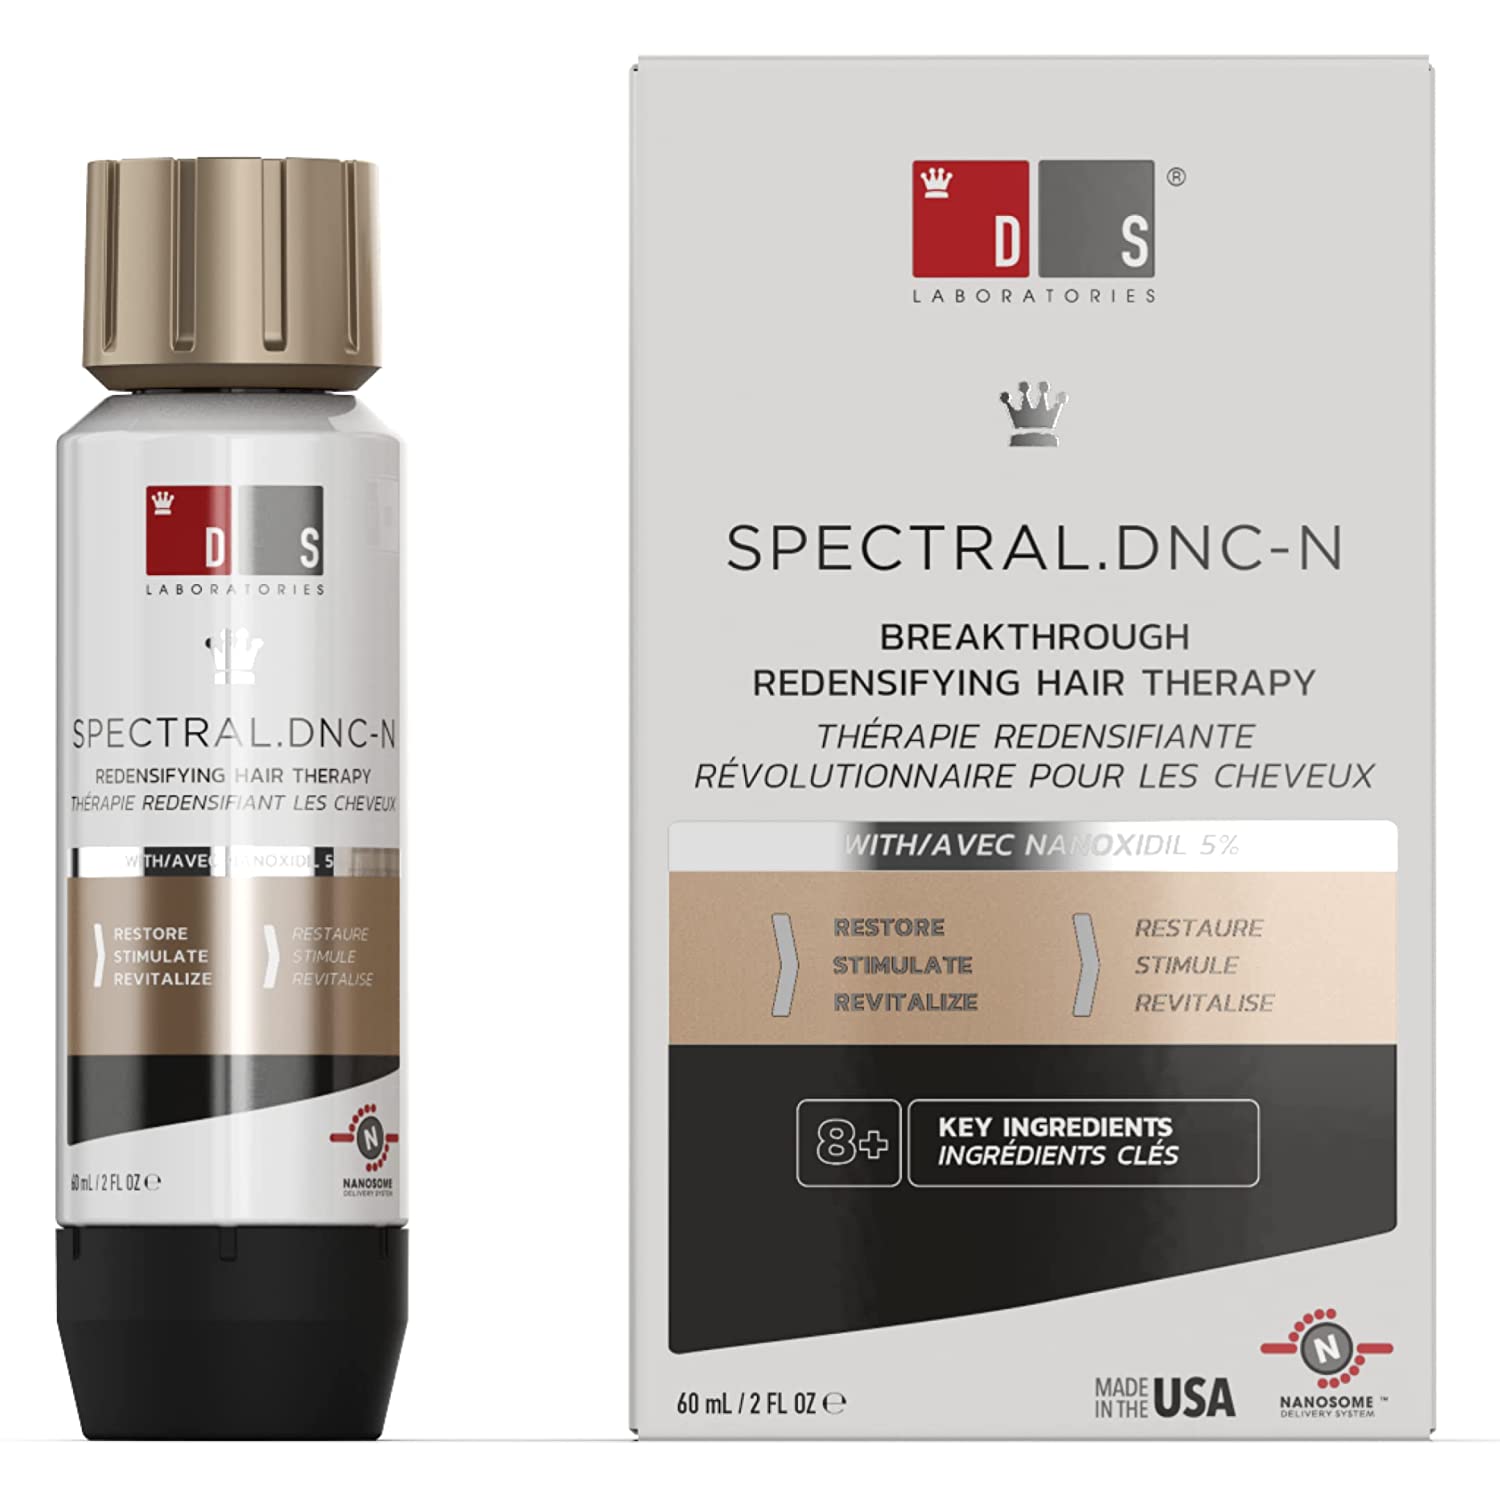 SPECTRAL.DNC-N | Breakthrough Redensifying Treatment with Nanoxidil 5%